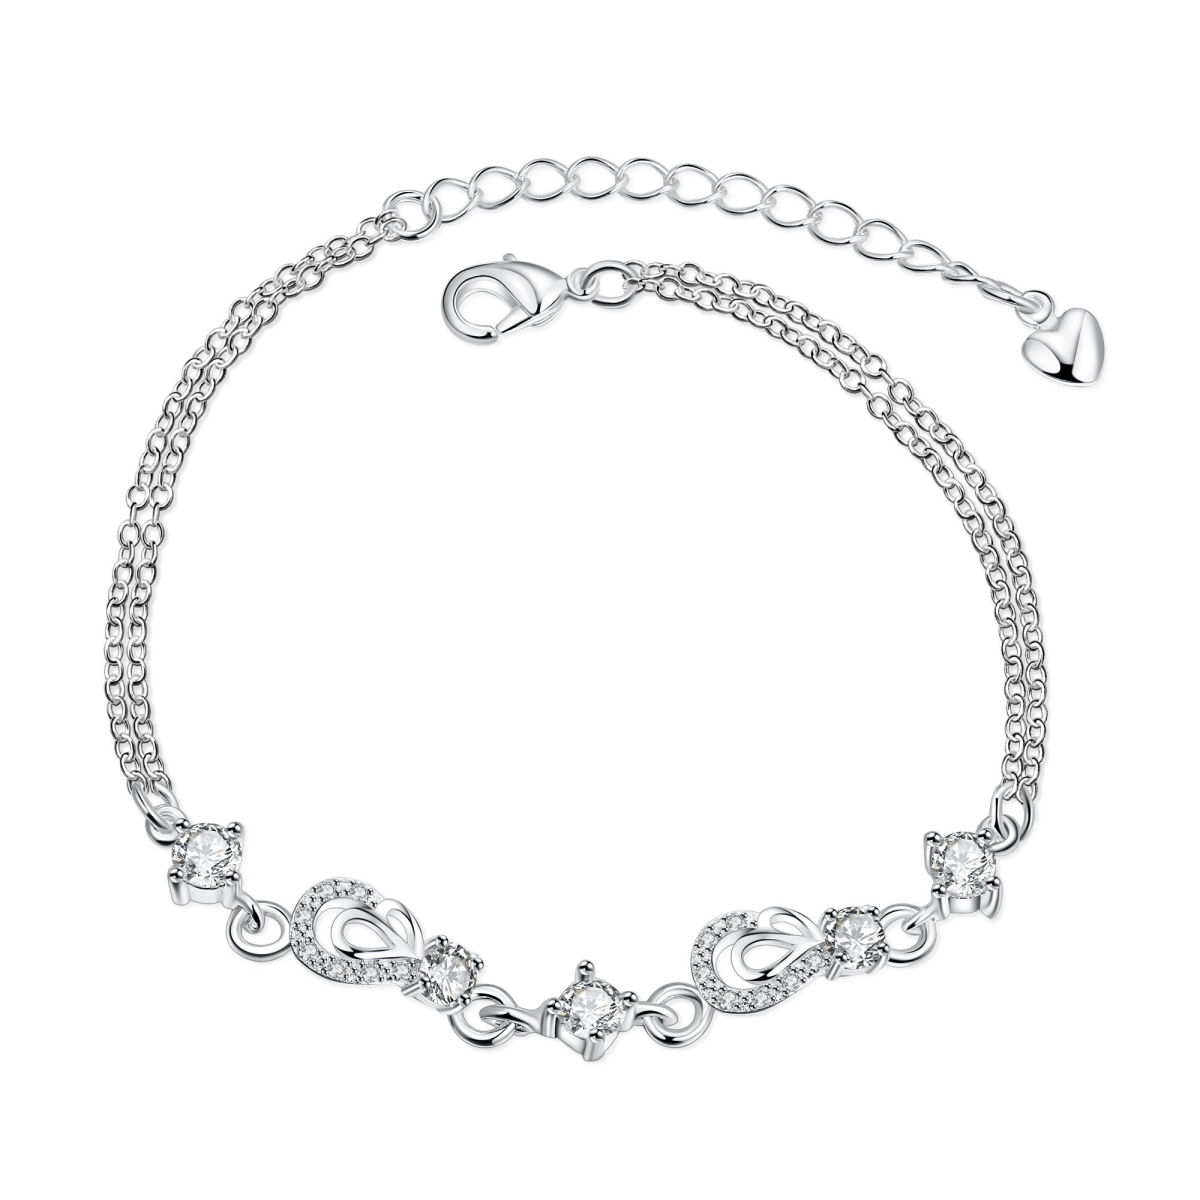 Picture of Alily Jewelry SPH006-B-GBOX Crystal 18K White Gold Plated Bracelet